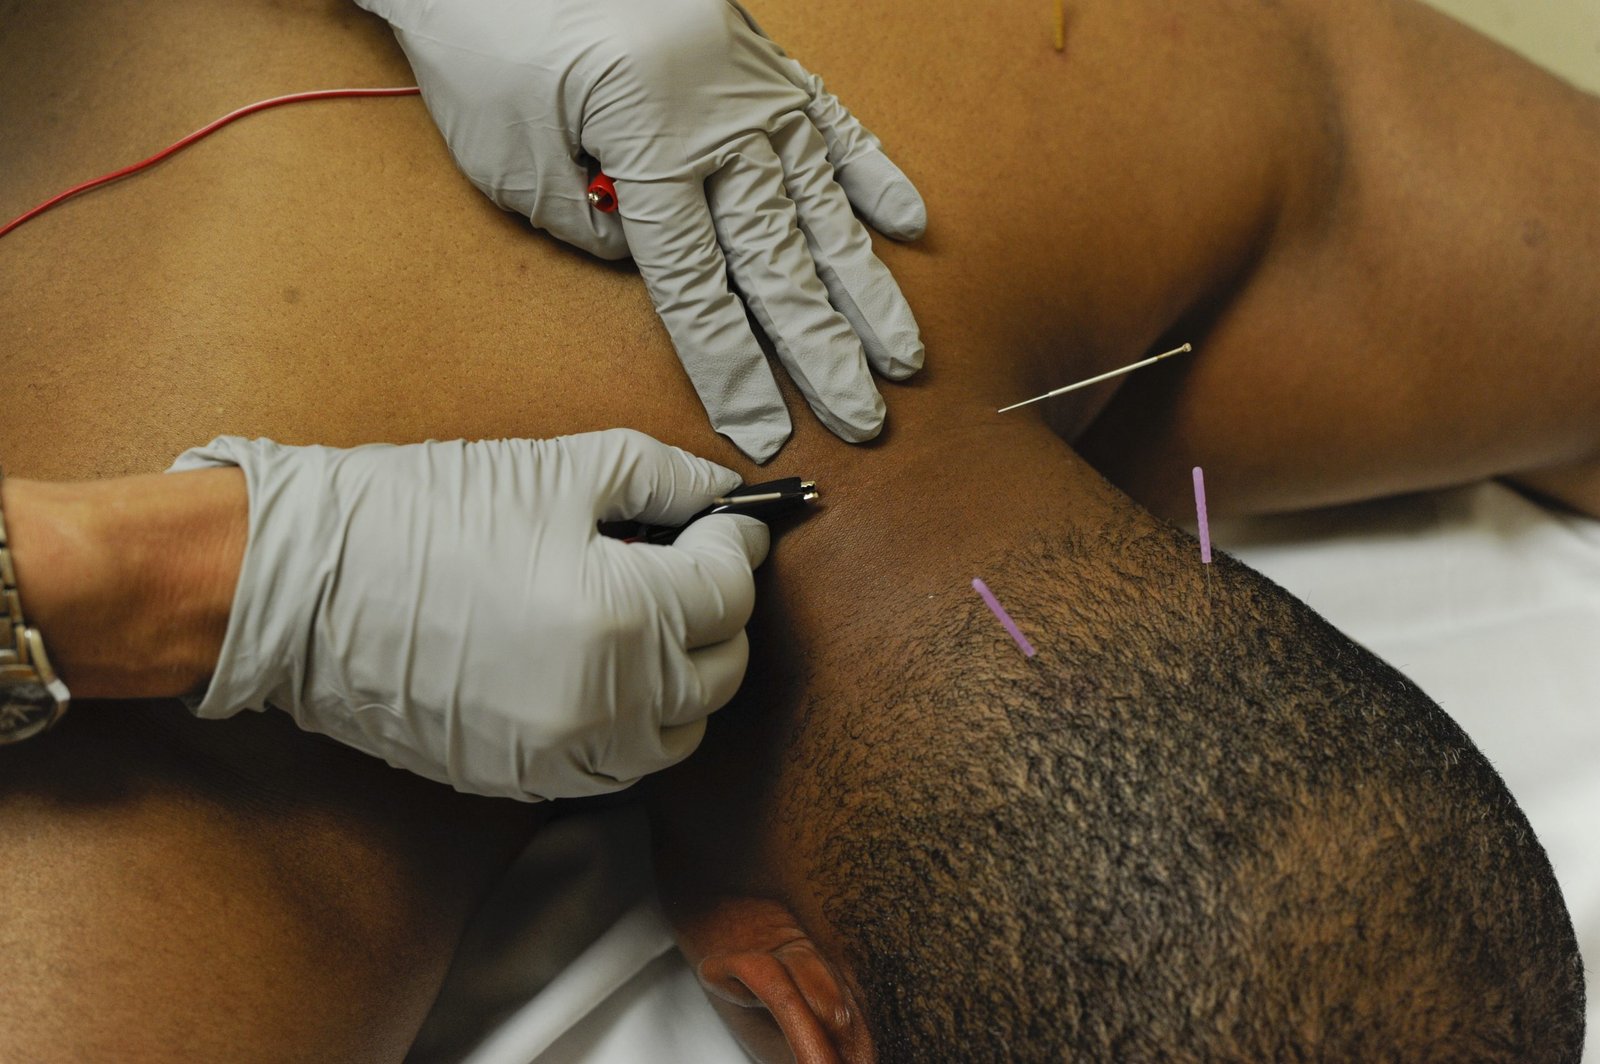 Dry needling uses acupuncture needles, but the technique is based on modern...